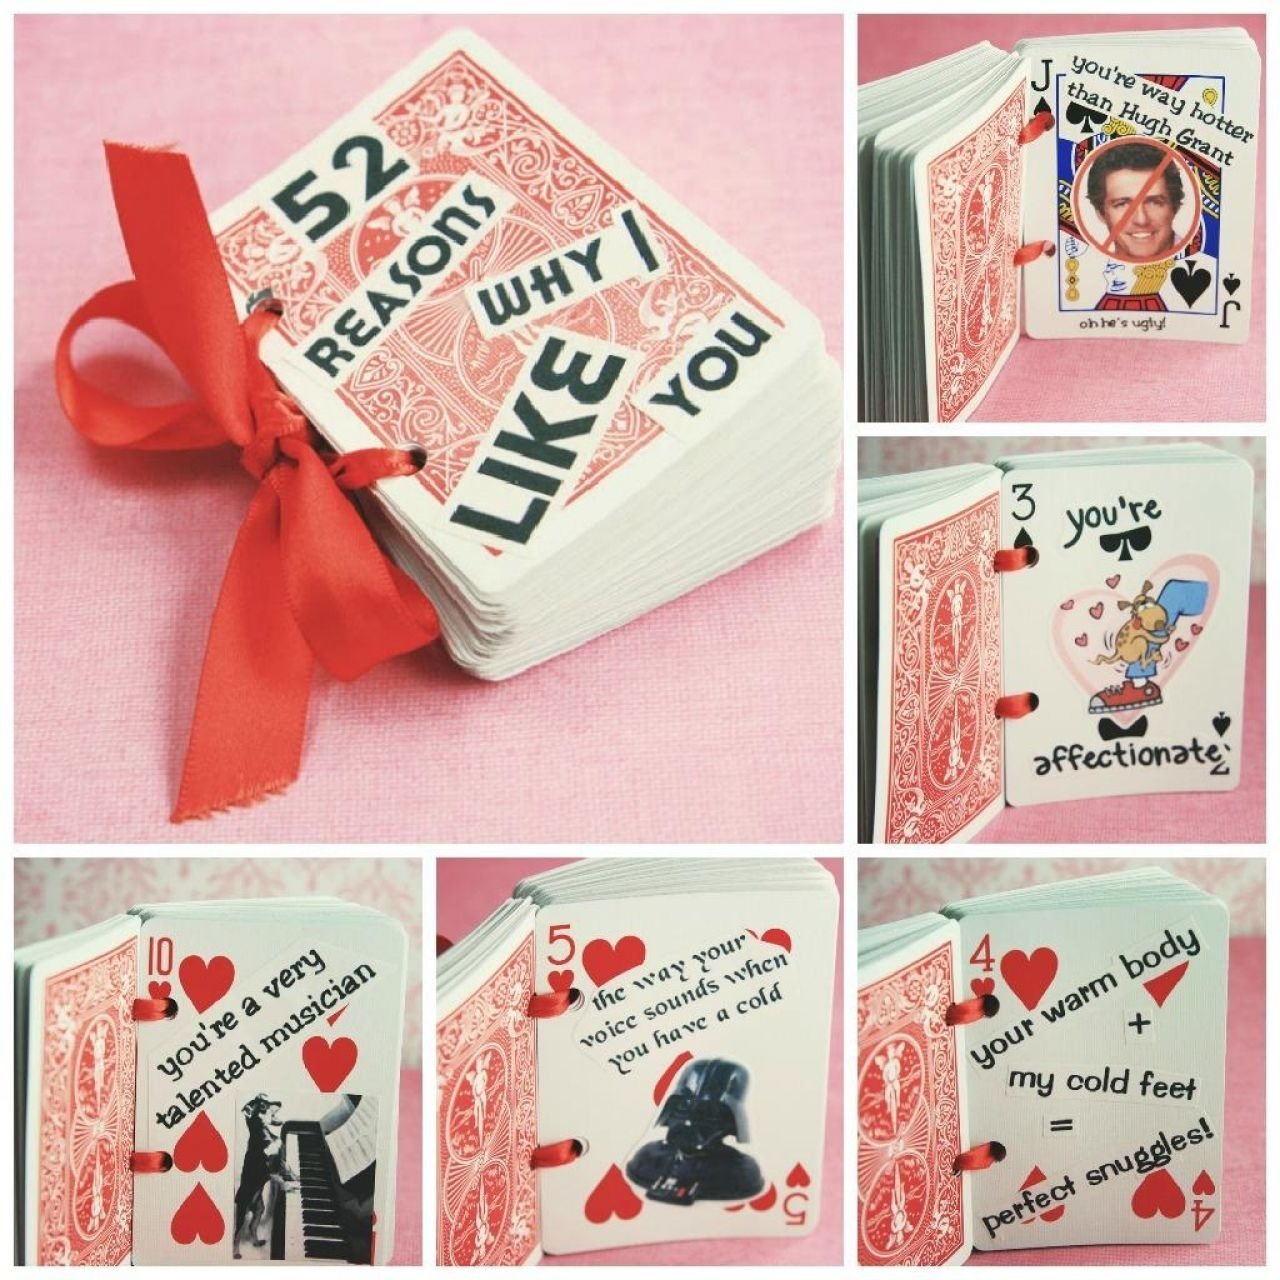 10 Wonderful Ideas For Valentines For Him valentines day crafts him lovely valentine gifts your dma homes 22 2022